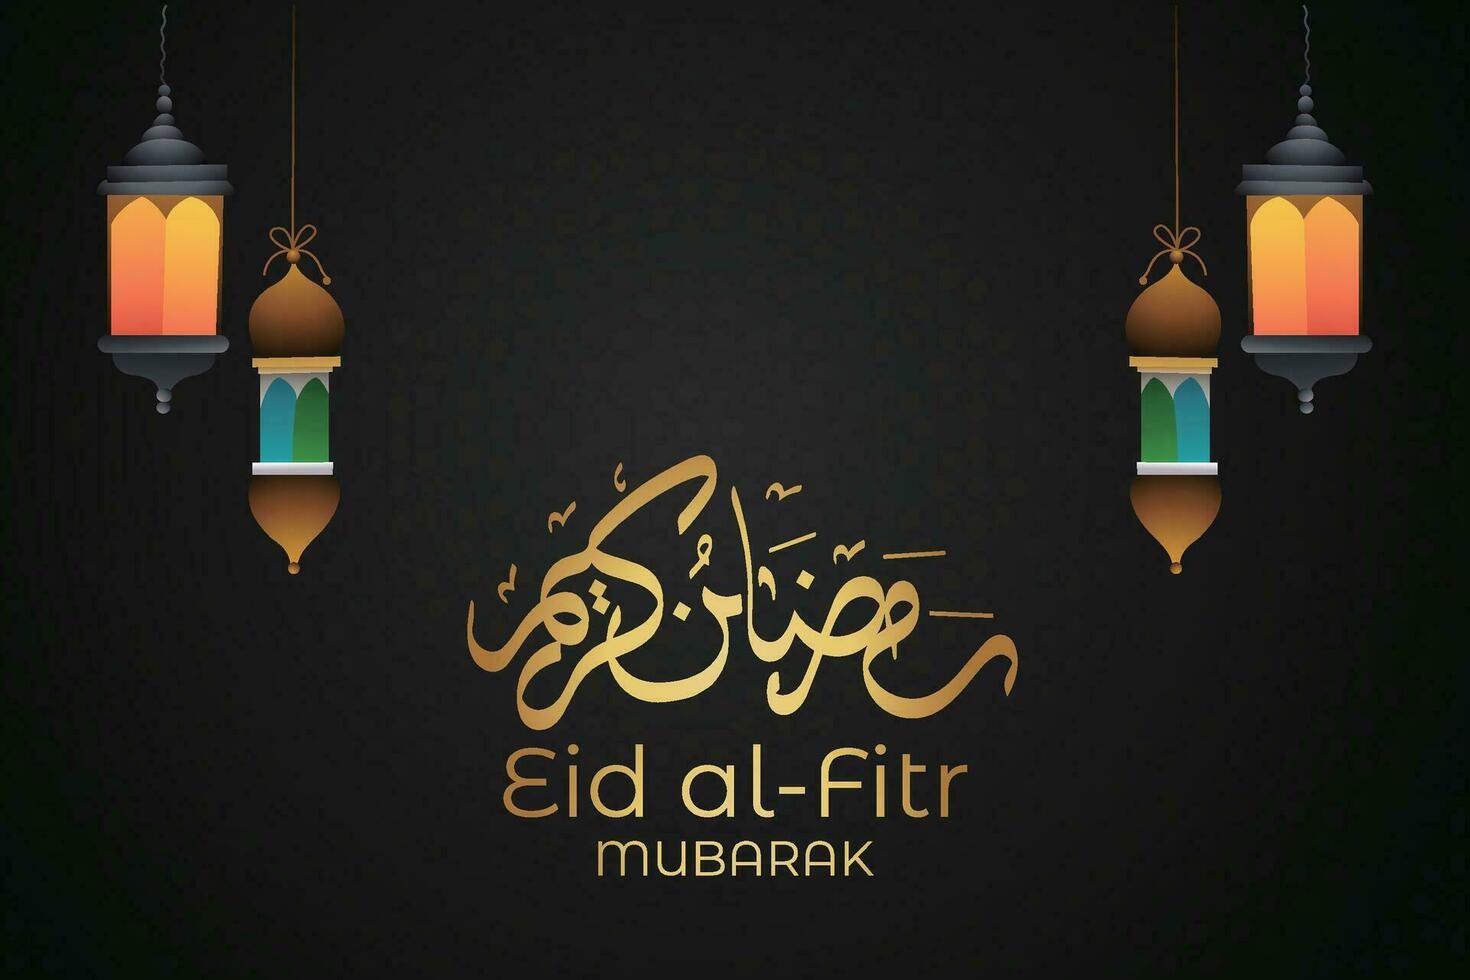 eid al-fitr mubarak greeting card with mosque and arabic text vector